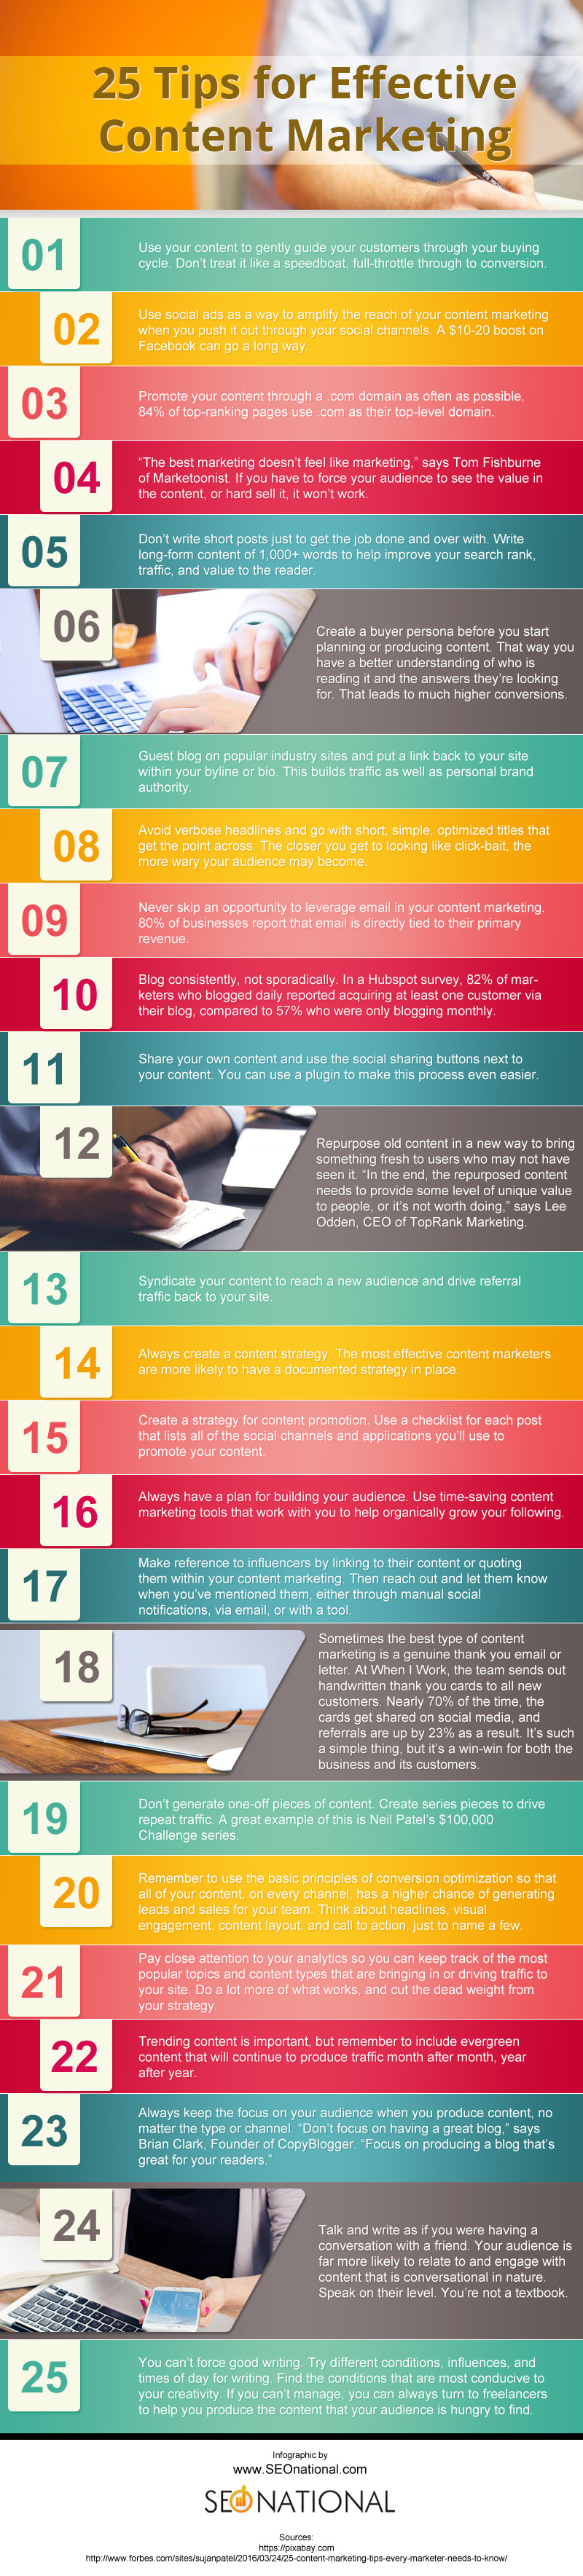 25 Tips for Effective Content Marketing [infographic]